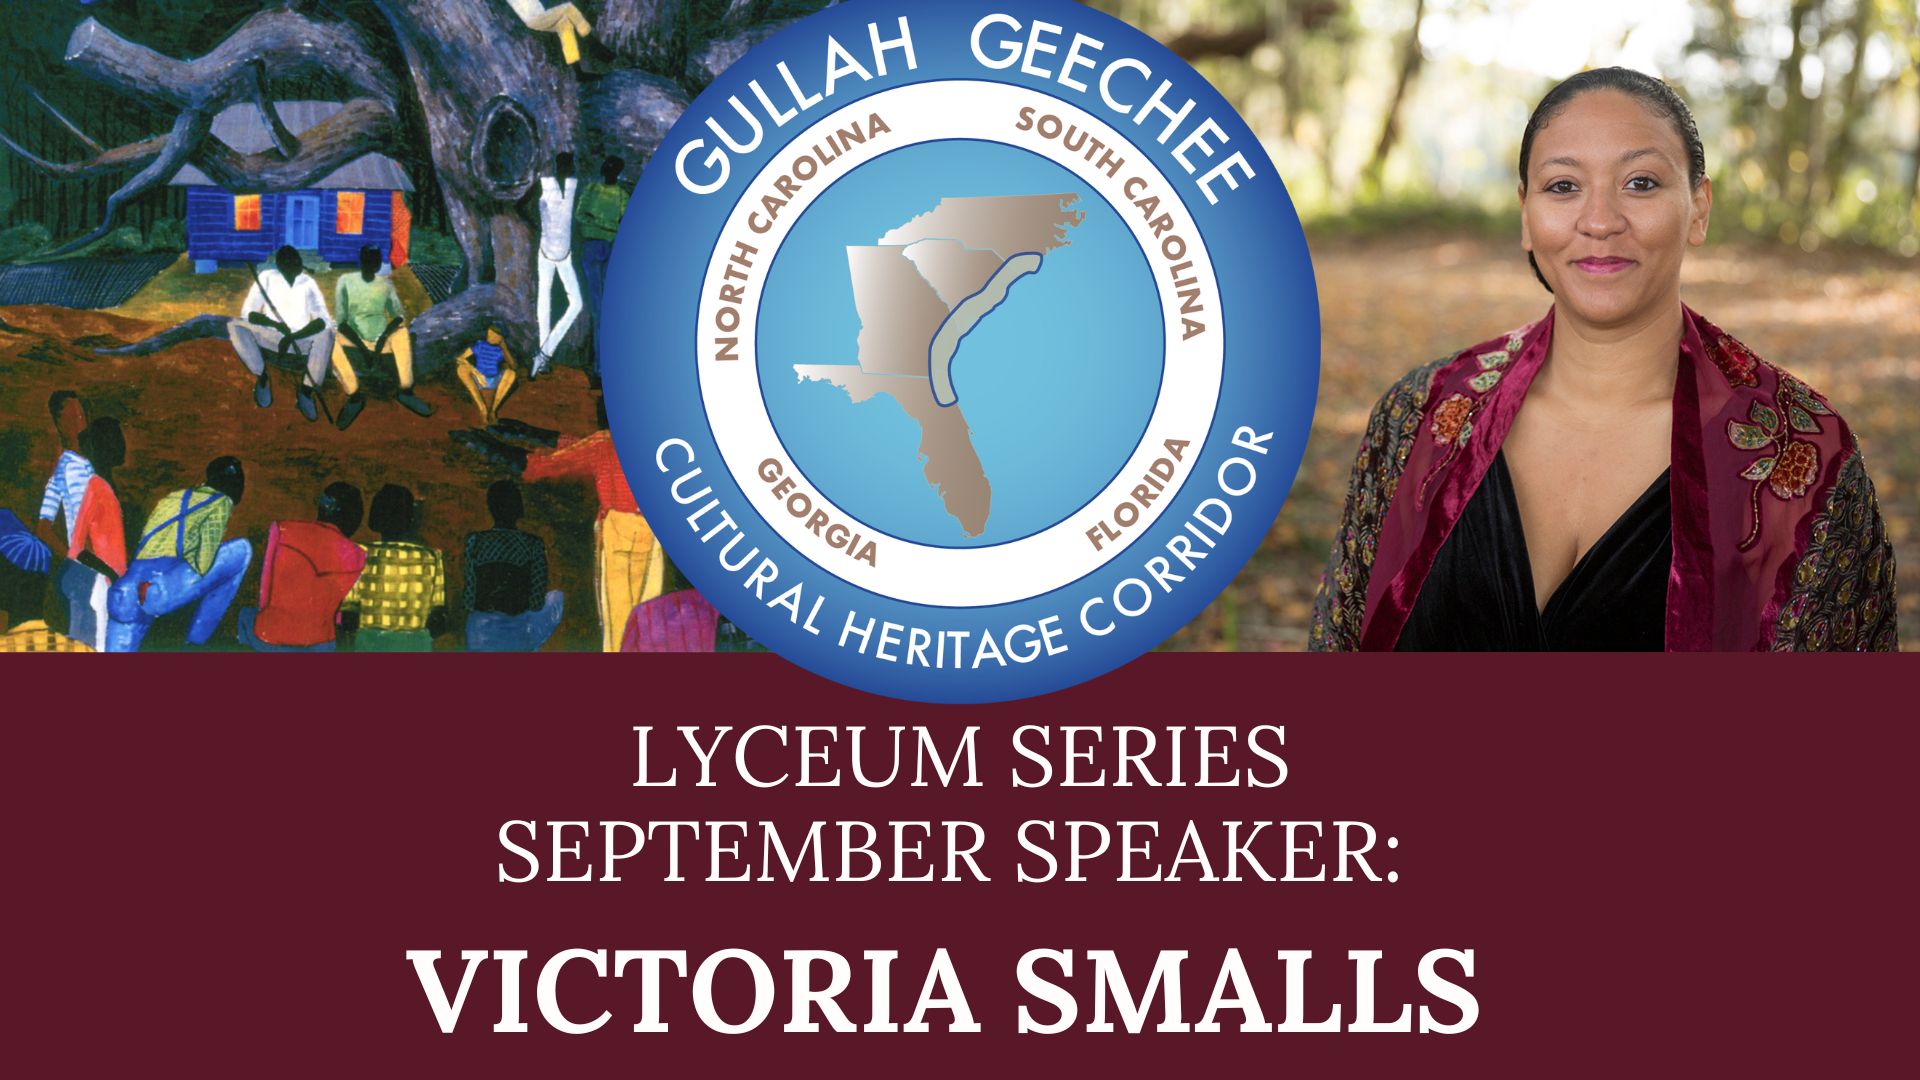 An image promoting the Southeast Ohio History Center's upcoming Lyceum Lunch series featuring speaker Victoria Smalls.